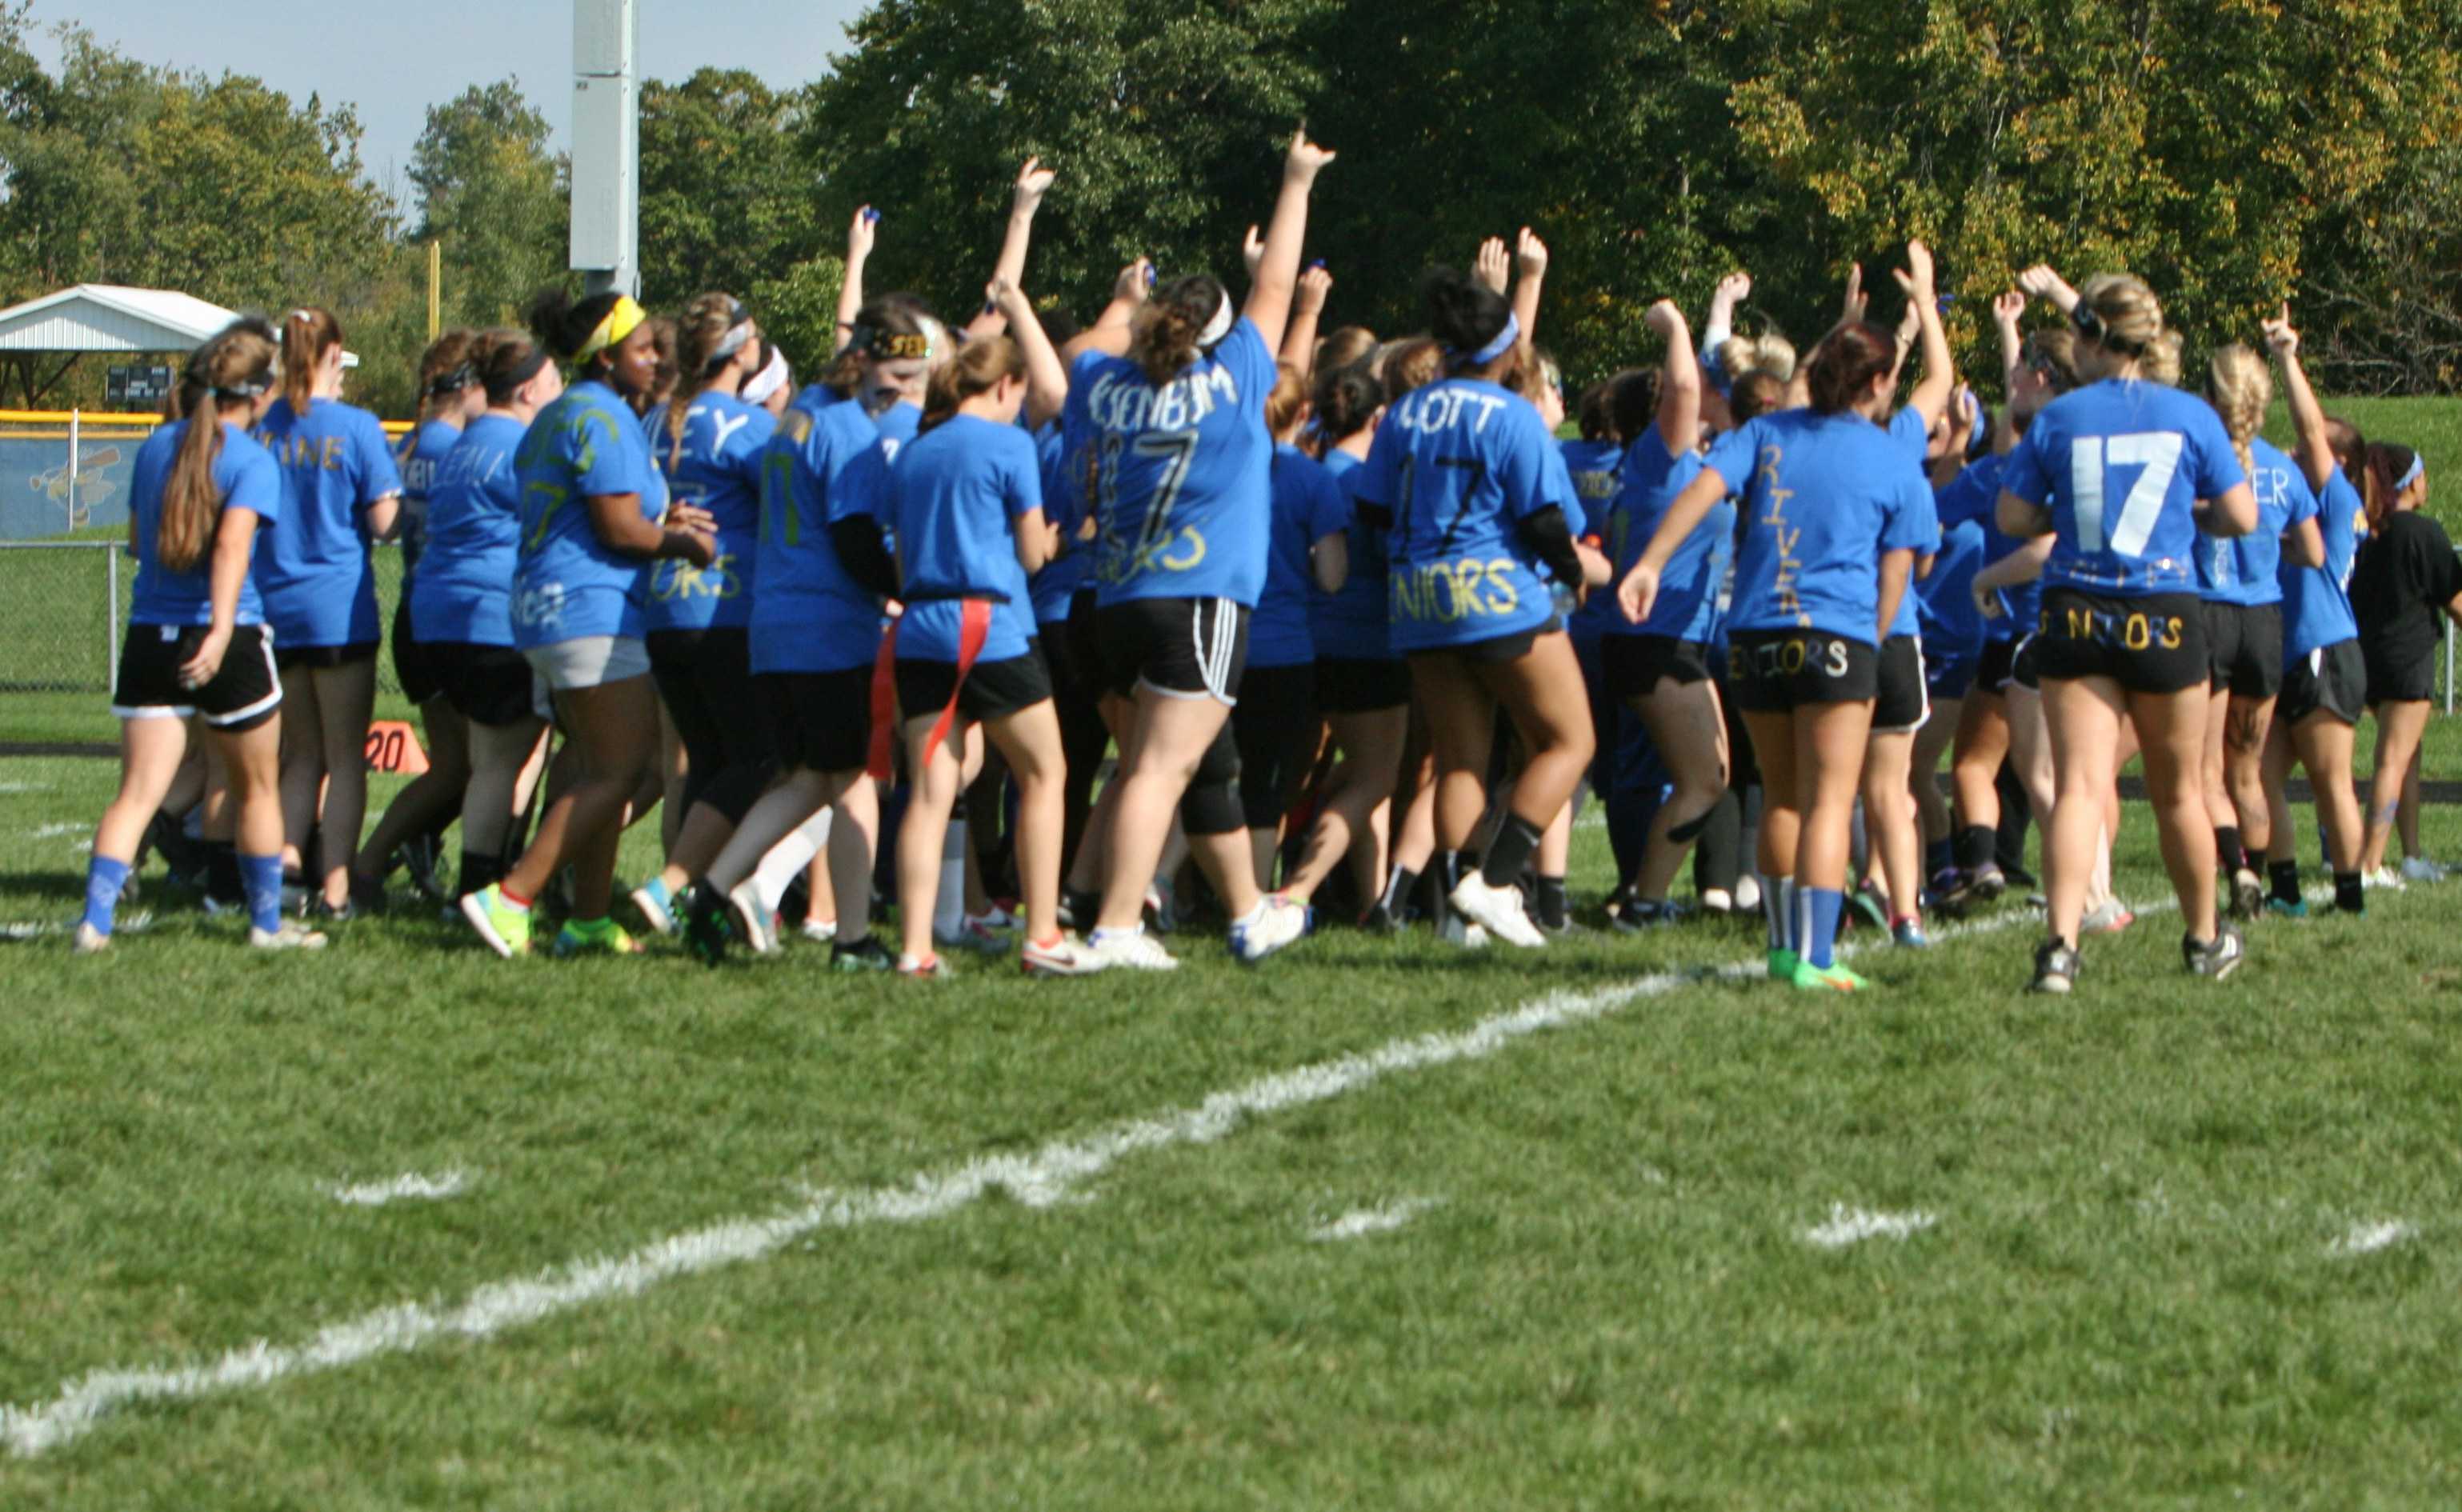 The Seniors celebrate their victory over the Freshmen in the powder puff championship 8-0 on Wednesday, Oct. 5.